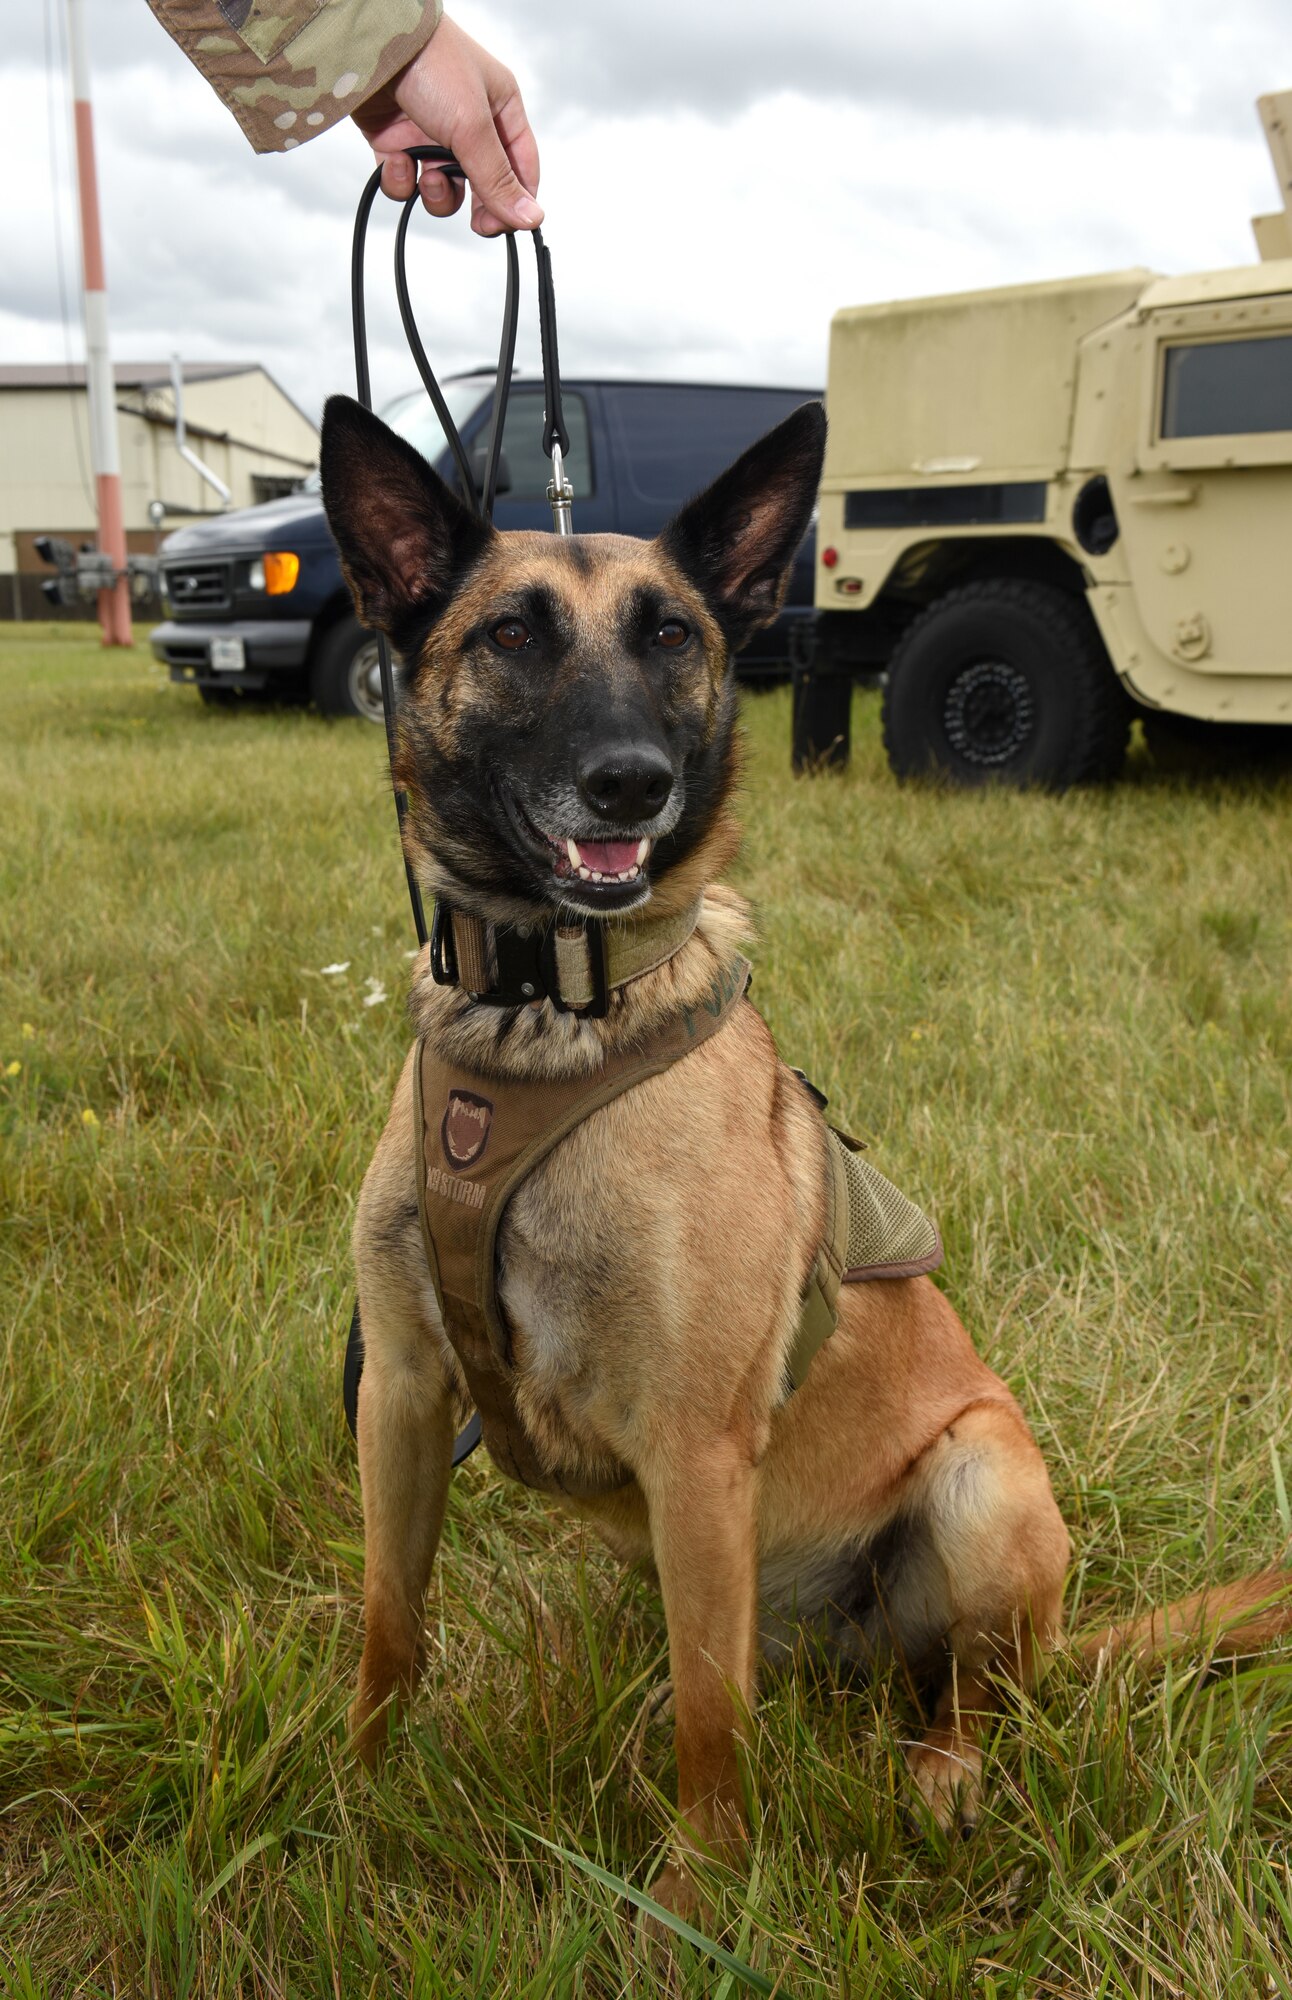 U.S. Air Force Military Working Dog Uta smiles for her photo as she checks out the Diversity and Inclusion Day event at Royal Air Force Mildenhall, England, Aug. 13, 2021. The event included a variety of performances, booths, a fire truck, Humvee and static aircraft. (U.S. Air Force photo by Karen Abeyasekere)